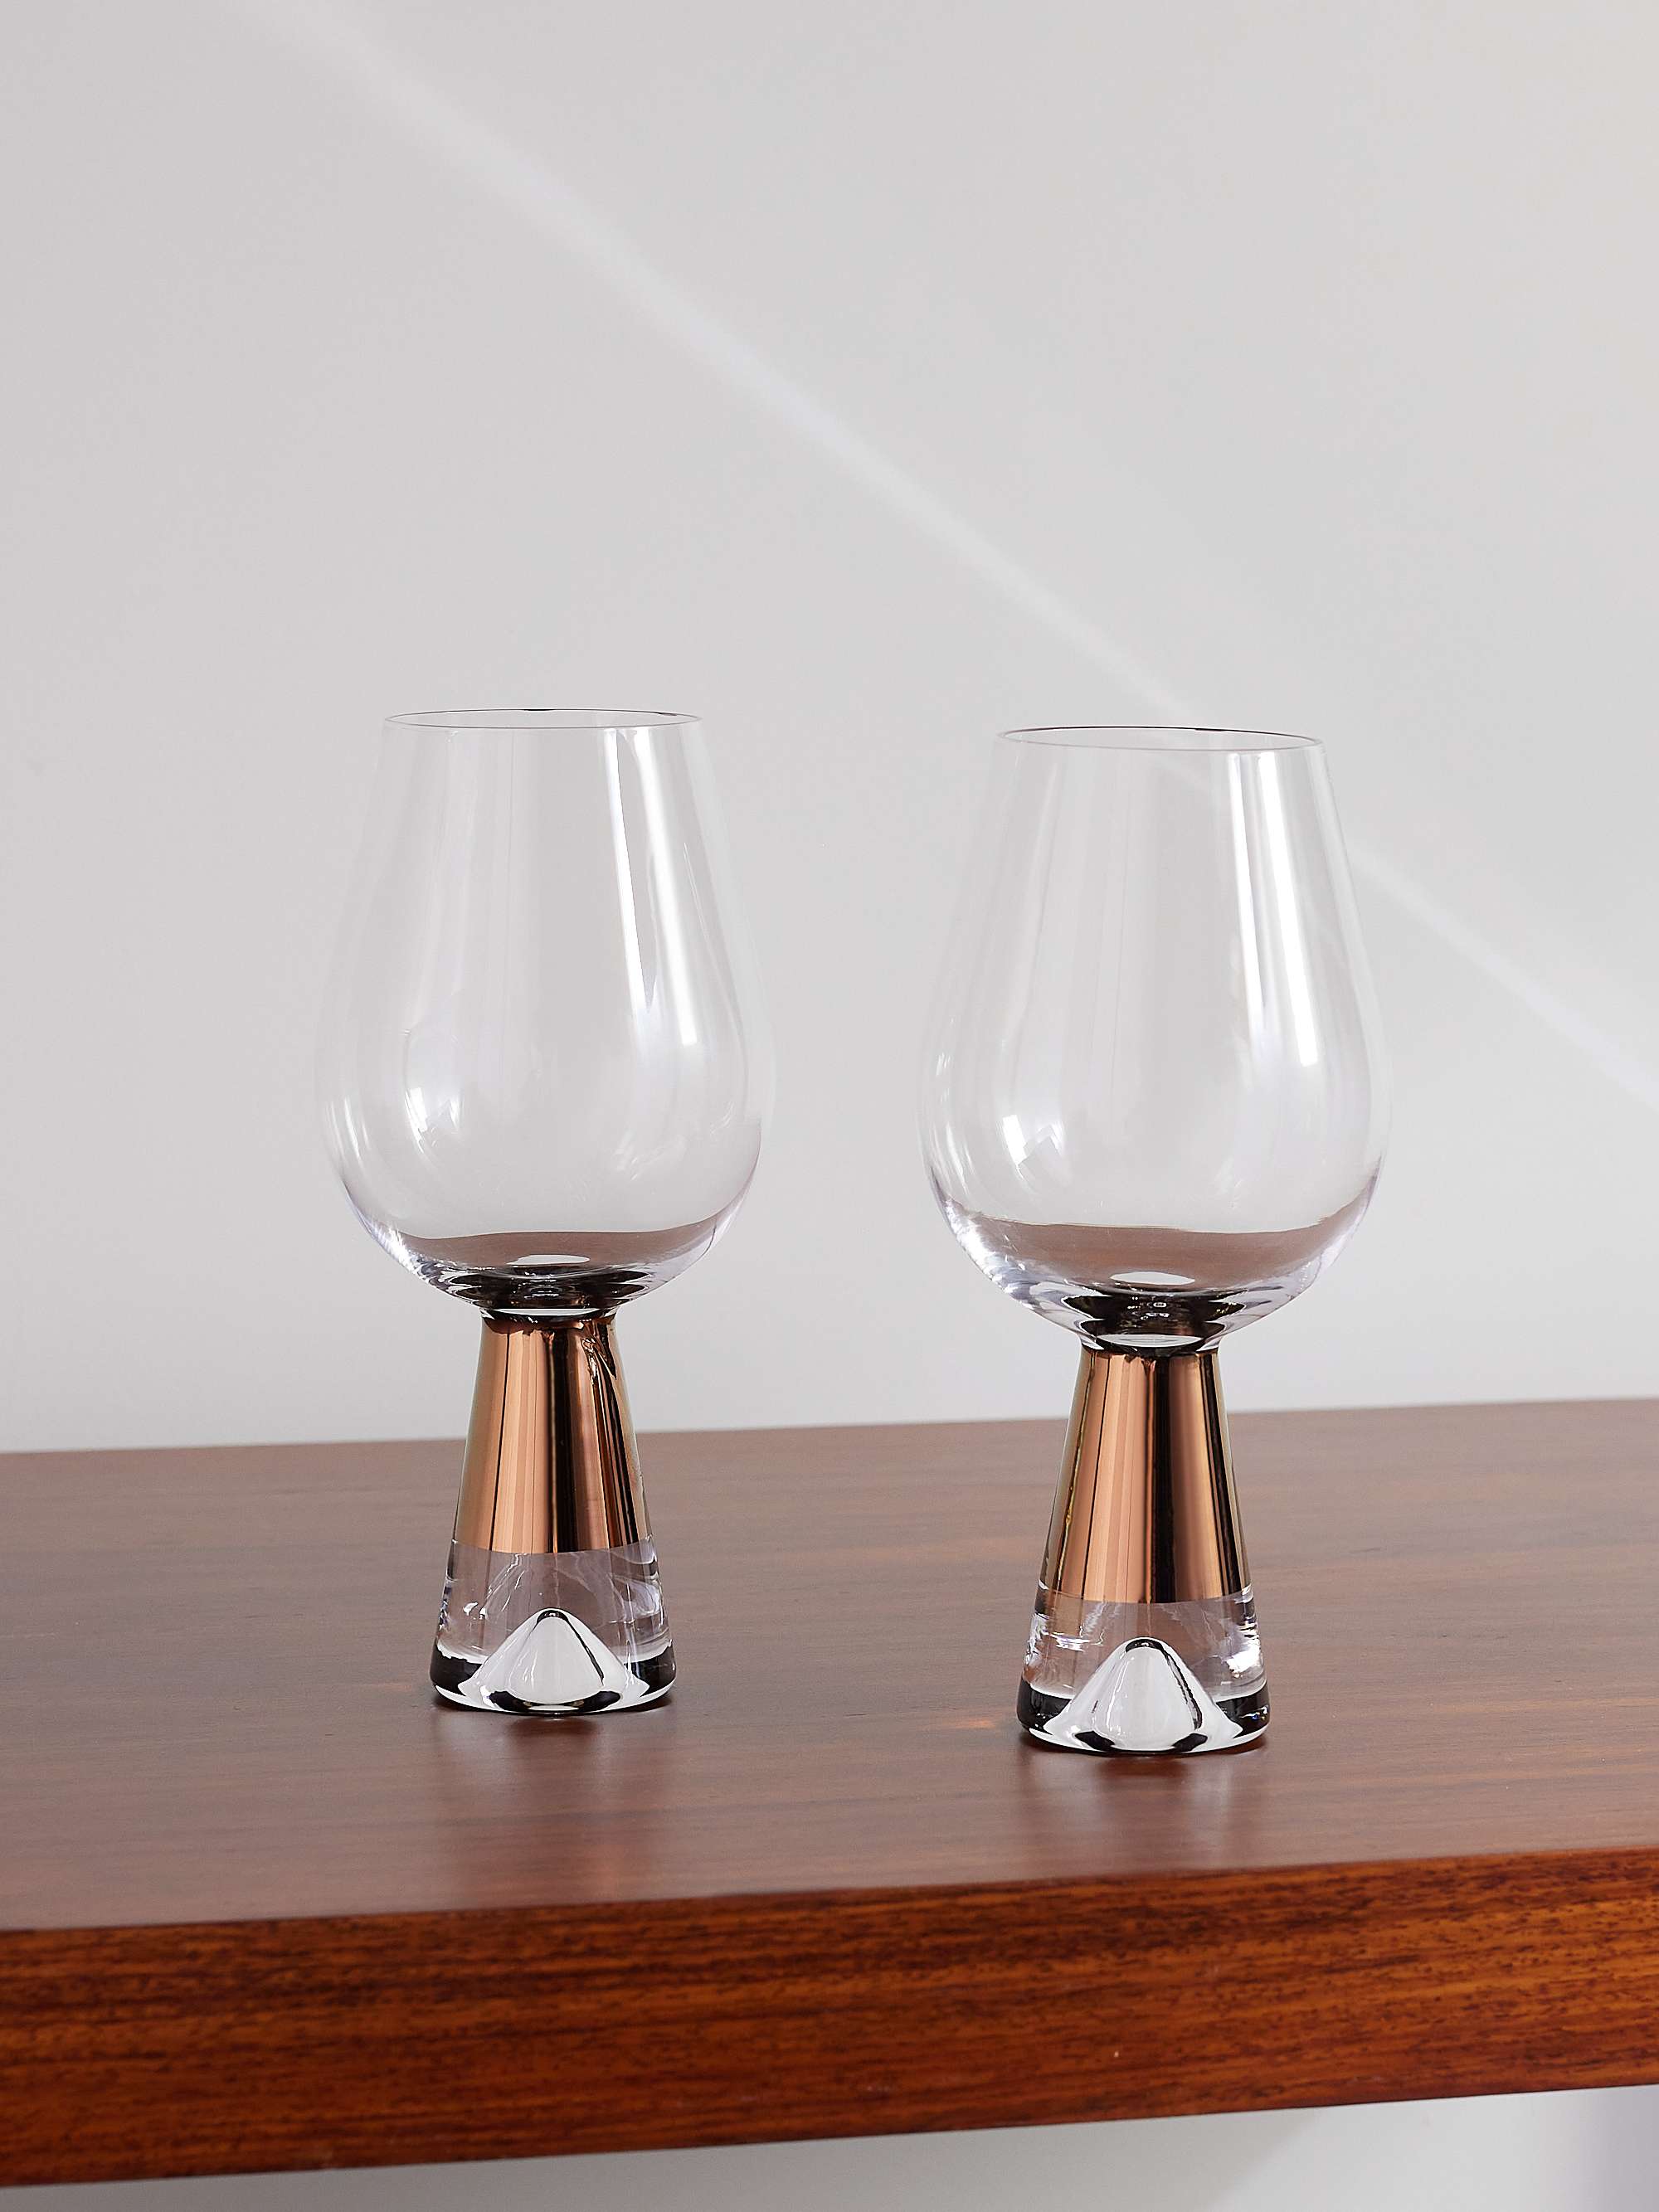 Tank Set of Two Painted Wine Glasses